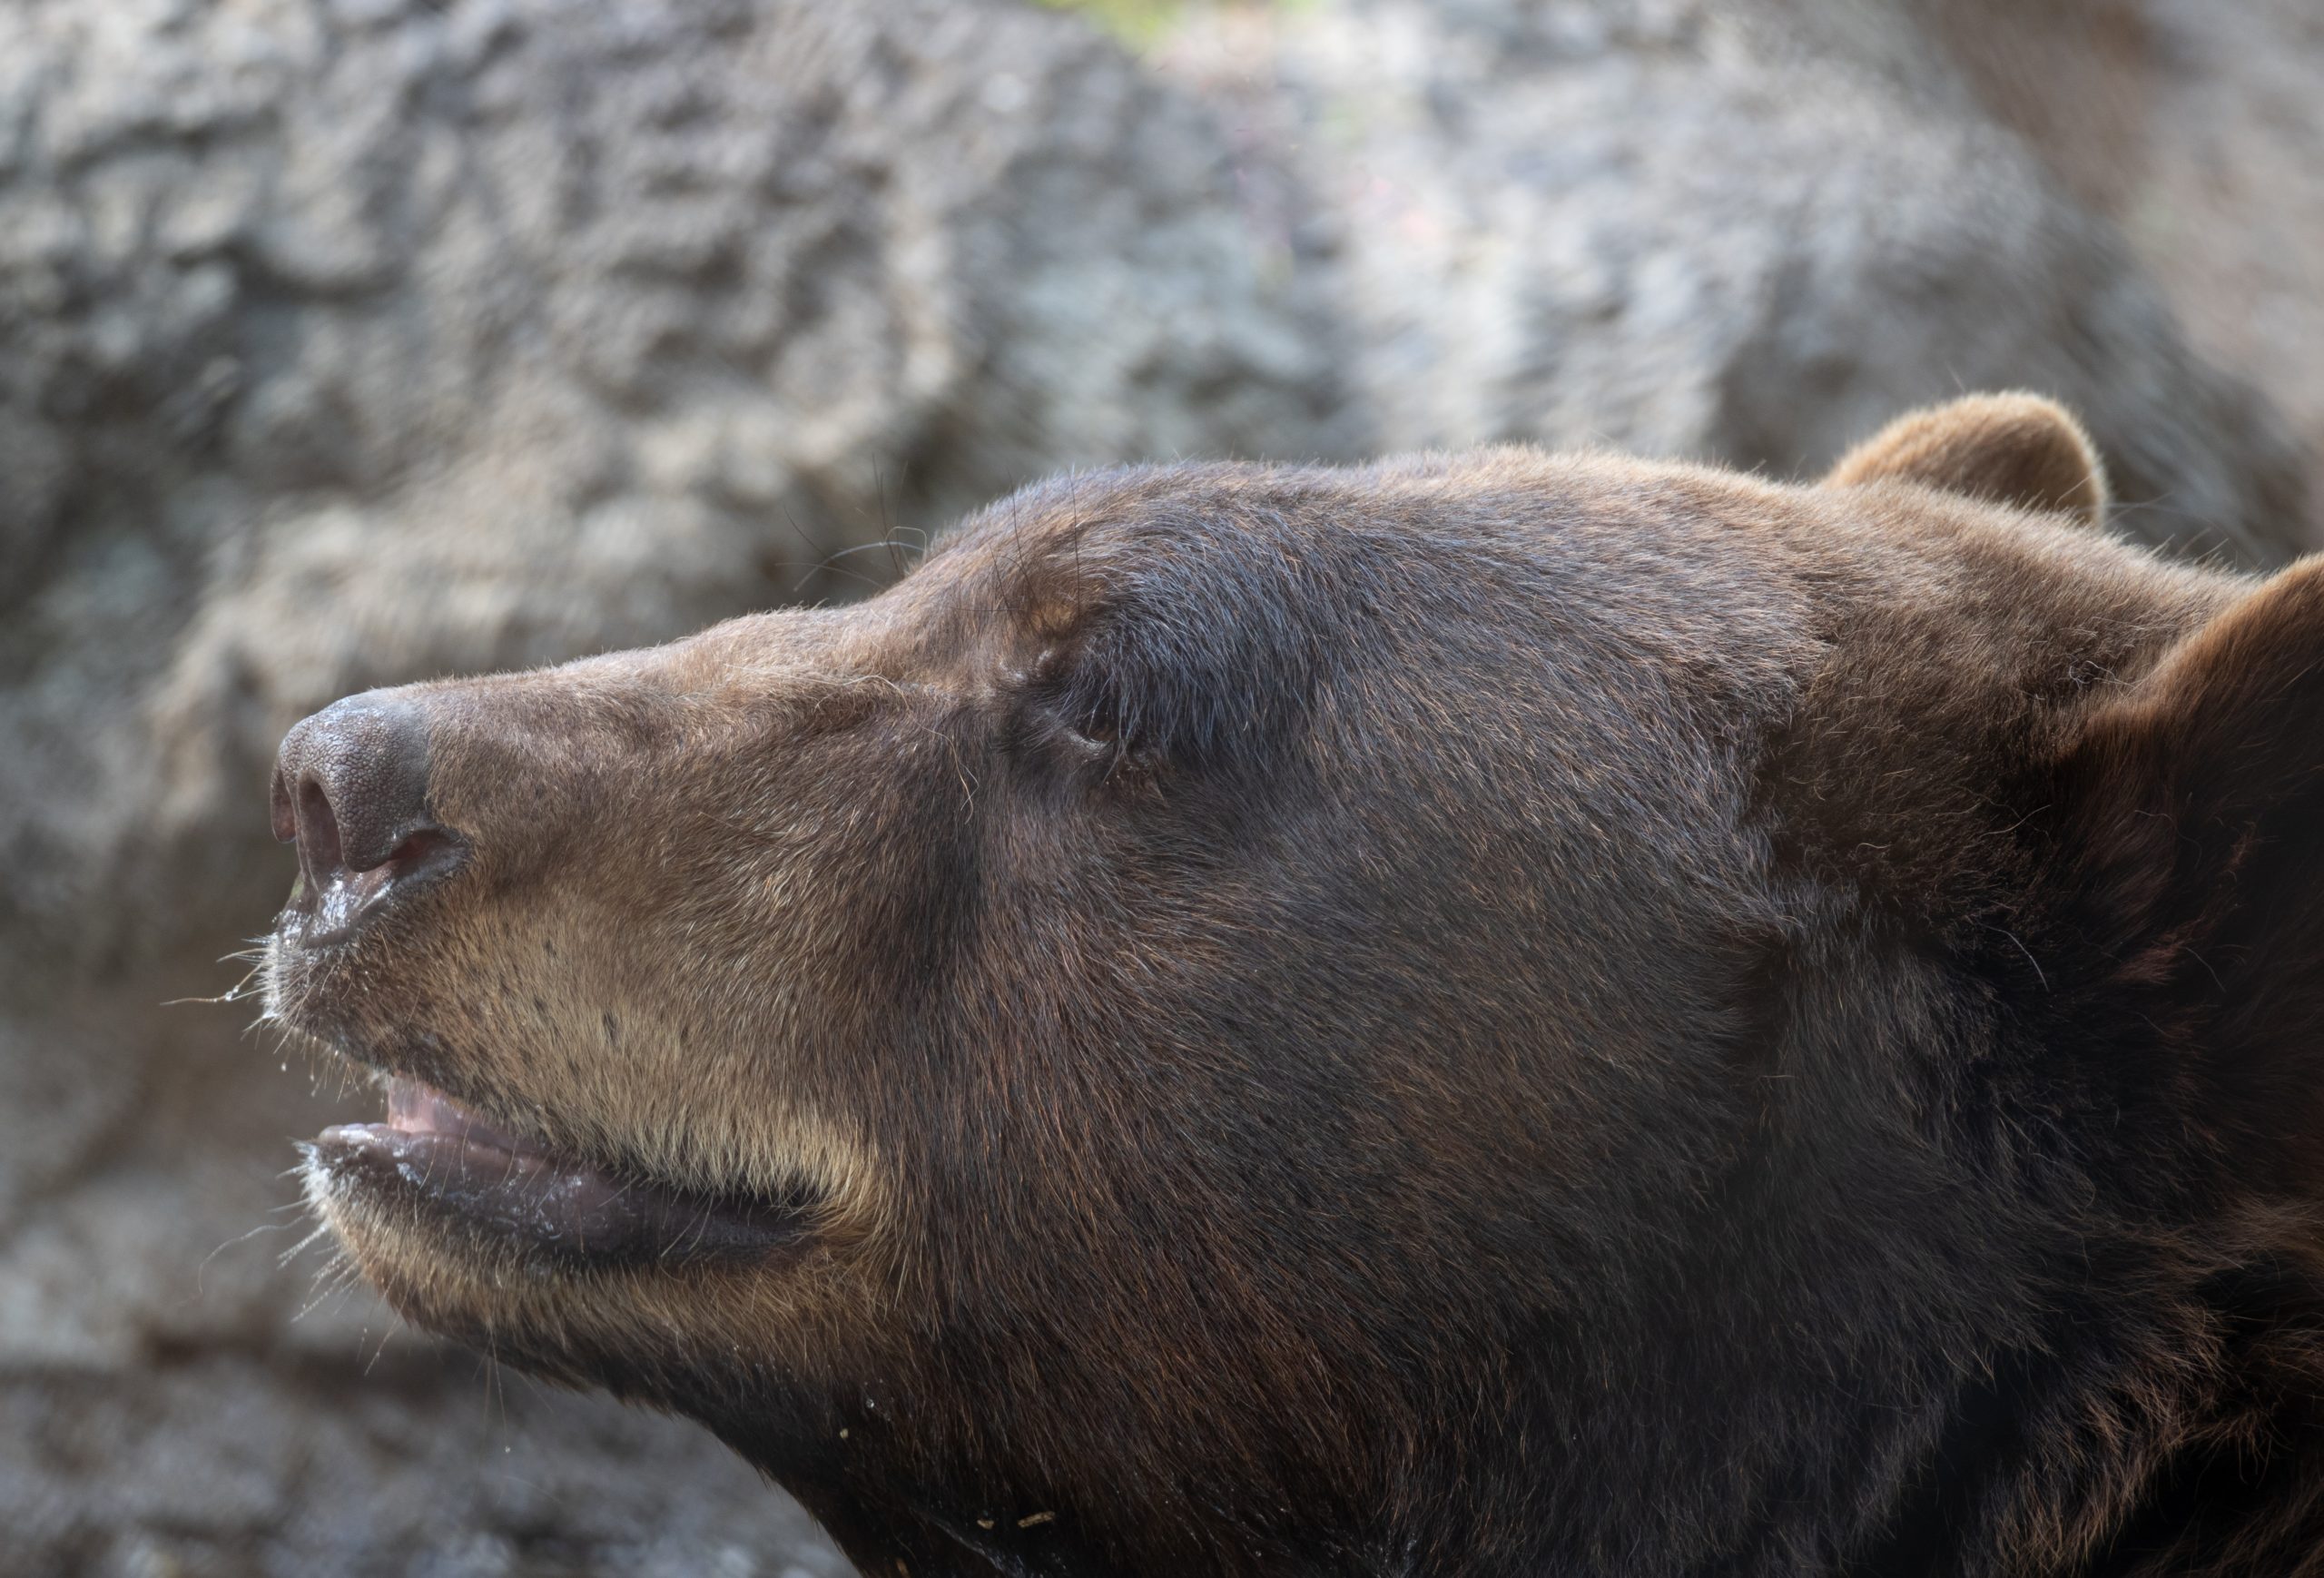 A close-up of the face of a black bear.